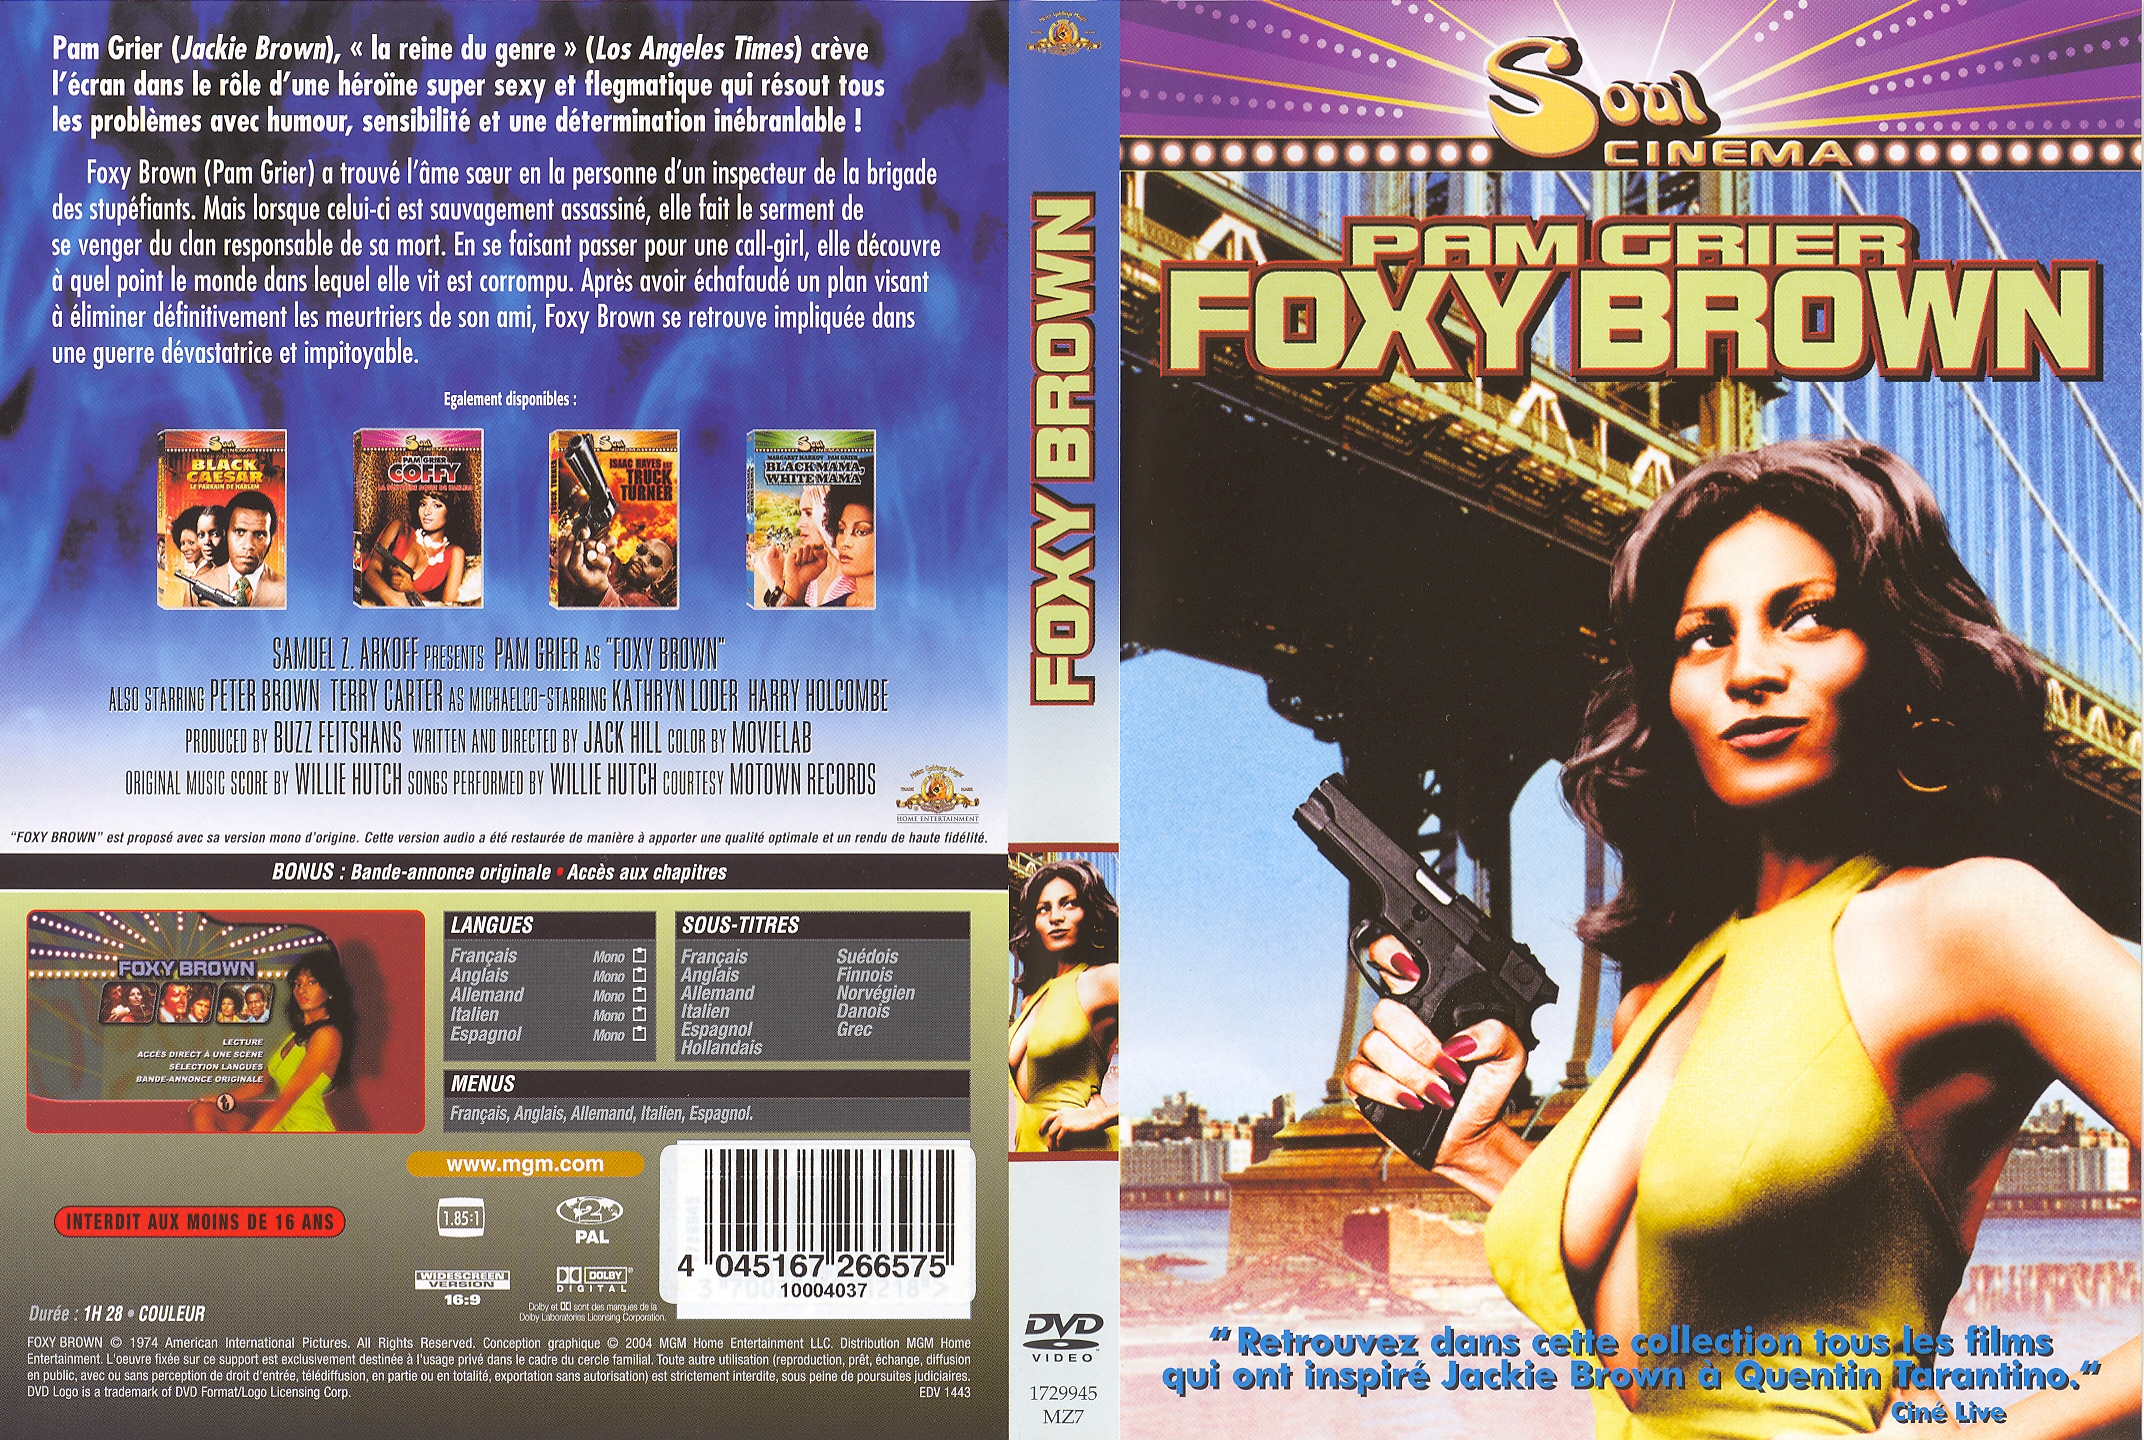 Jaquette DVD Foxy Brown